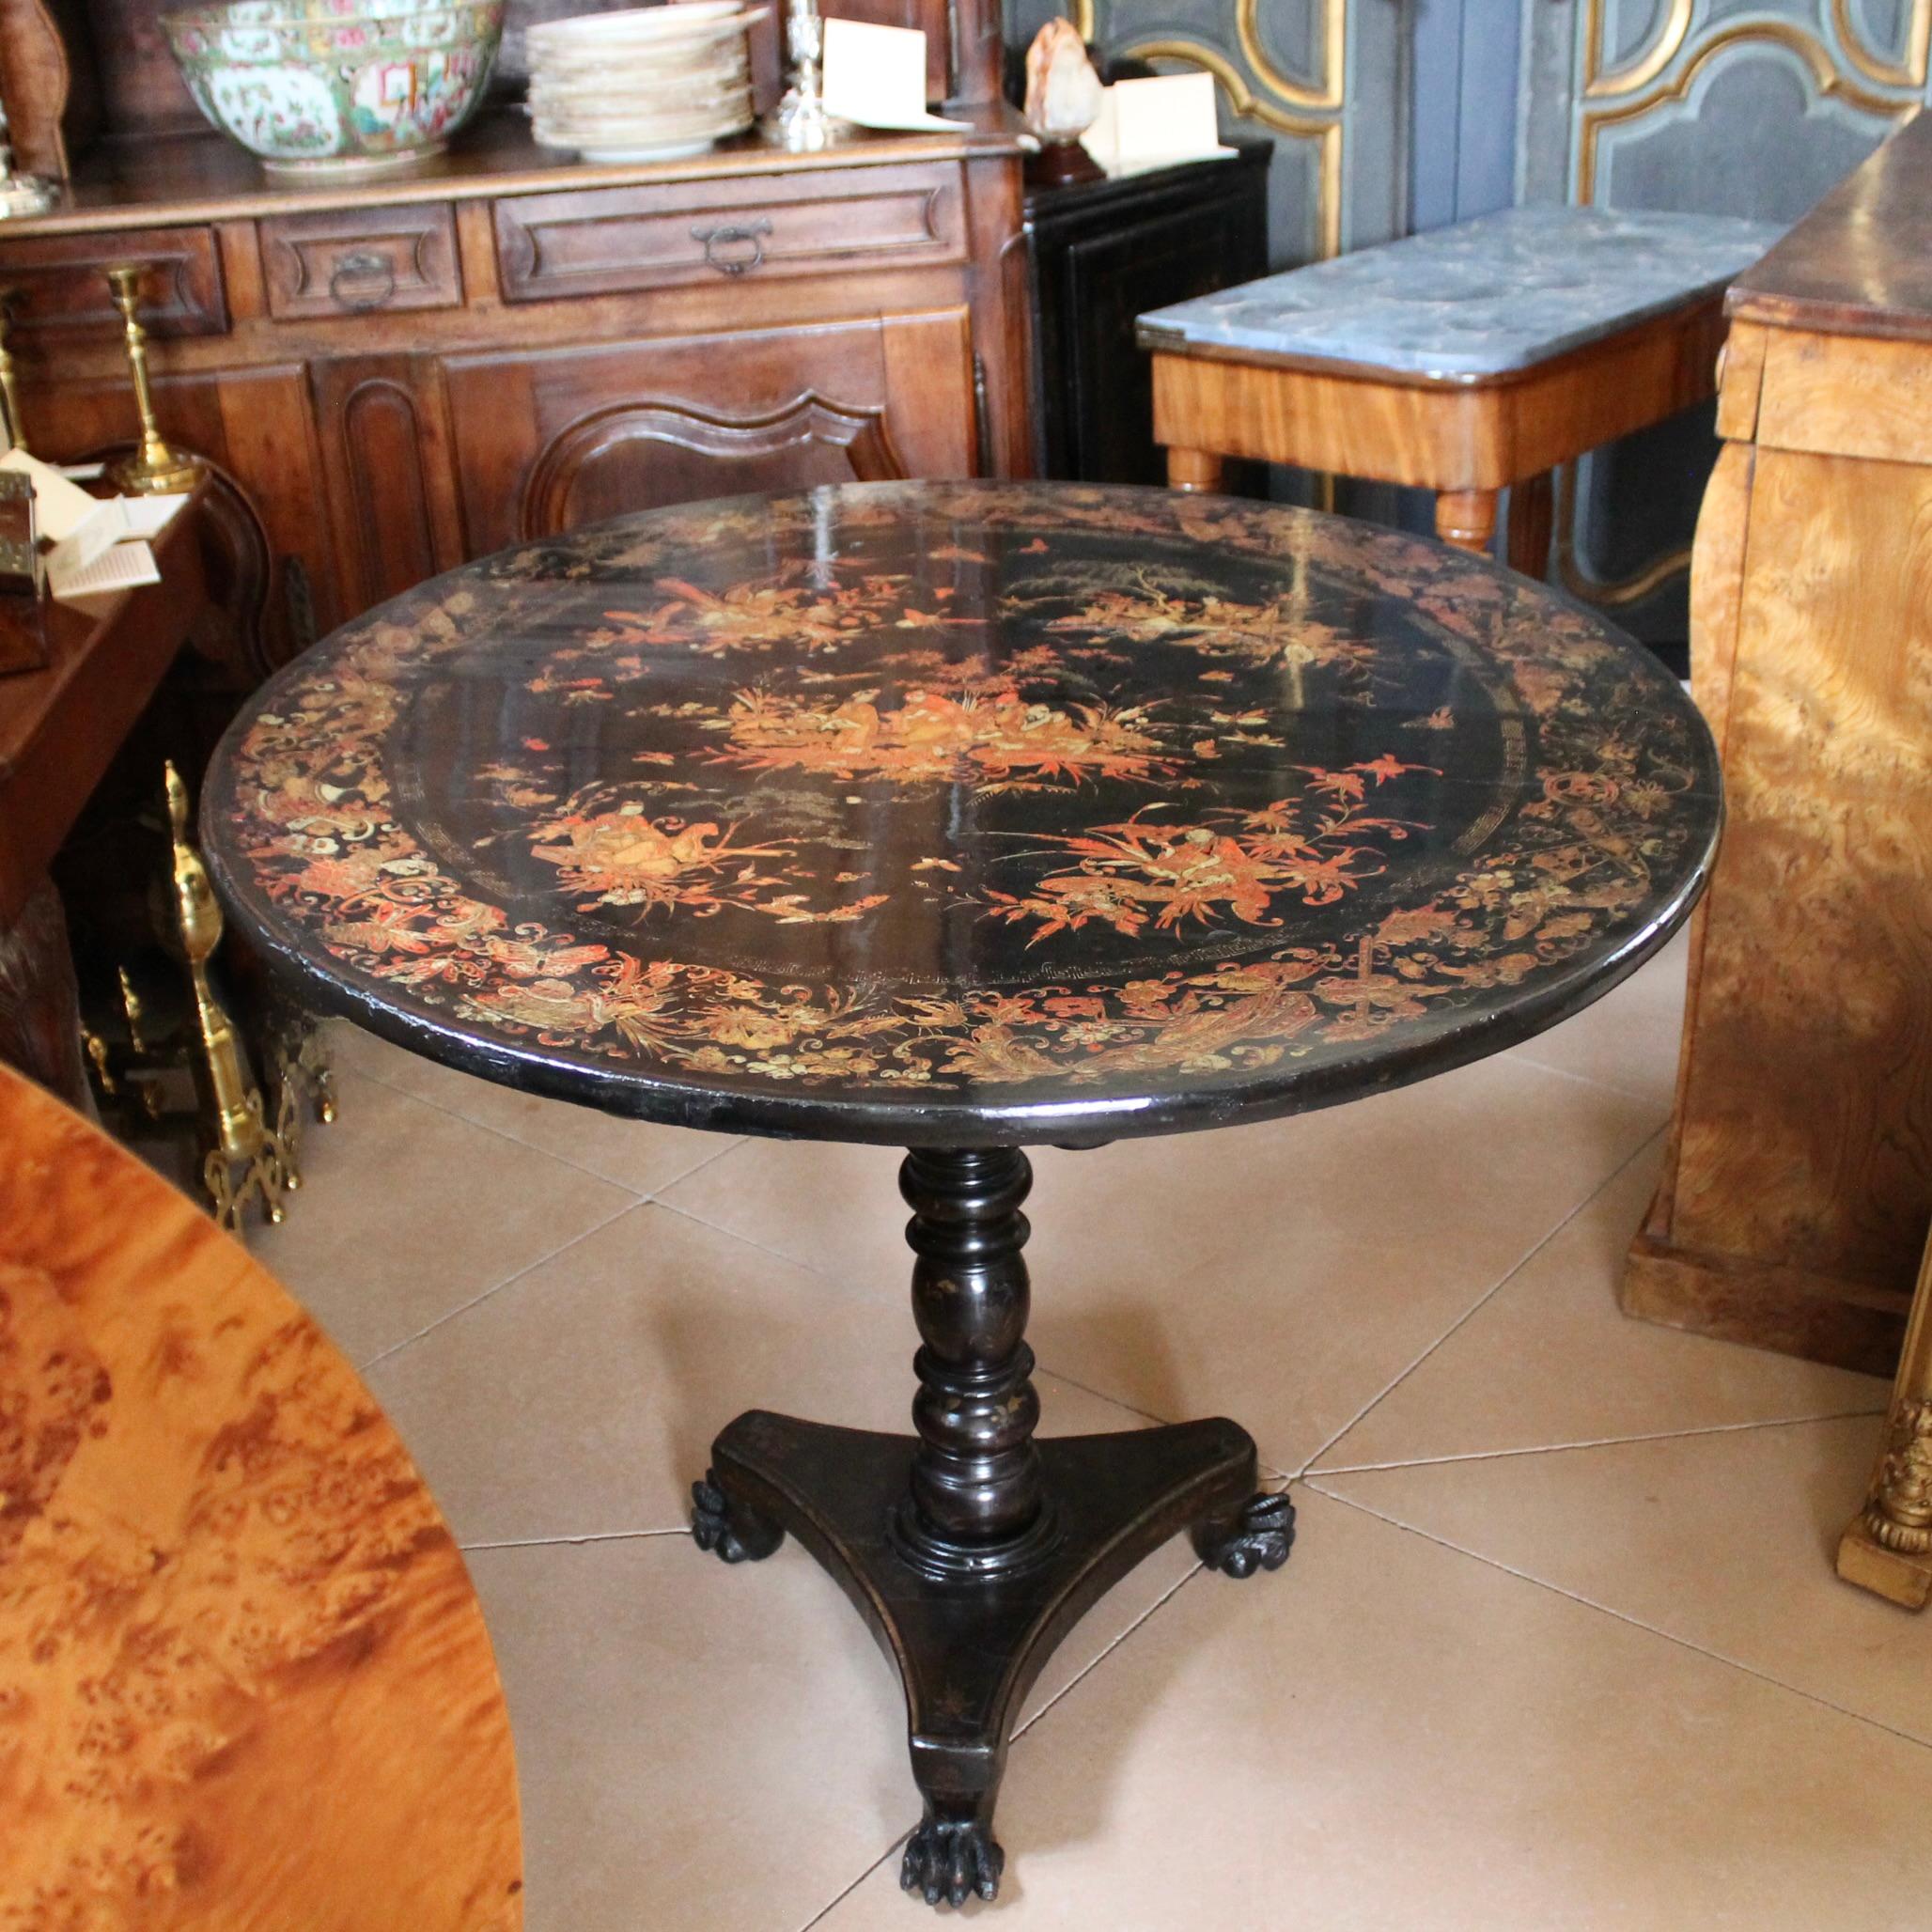 Fine Chinese Export Black Lacquer And Gilt Decorated Tilt Top Table In Good Condition For Sale In Free Union, VA